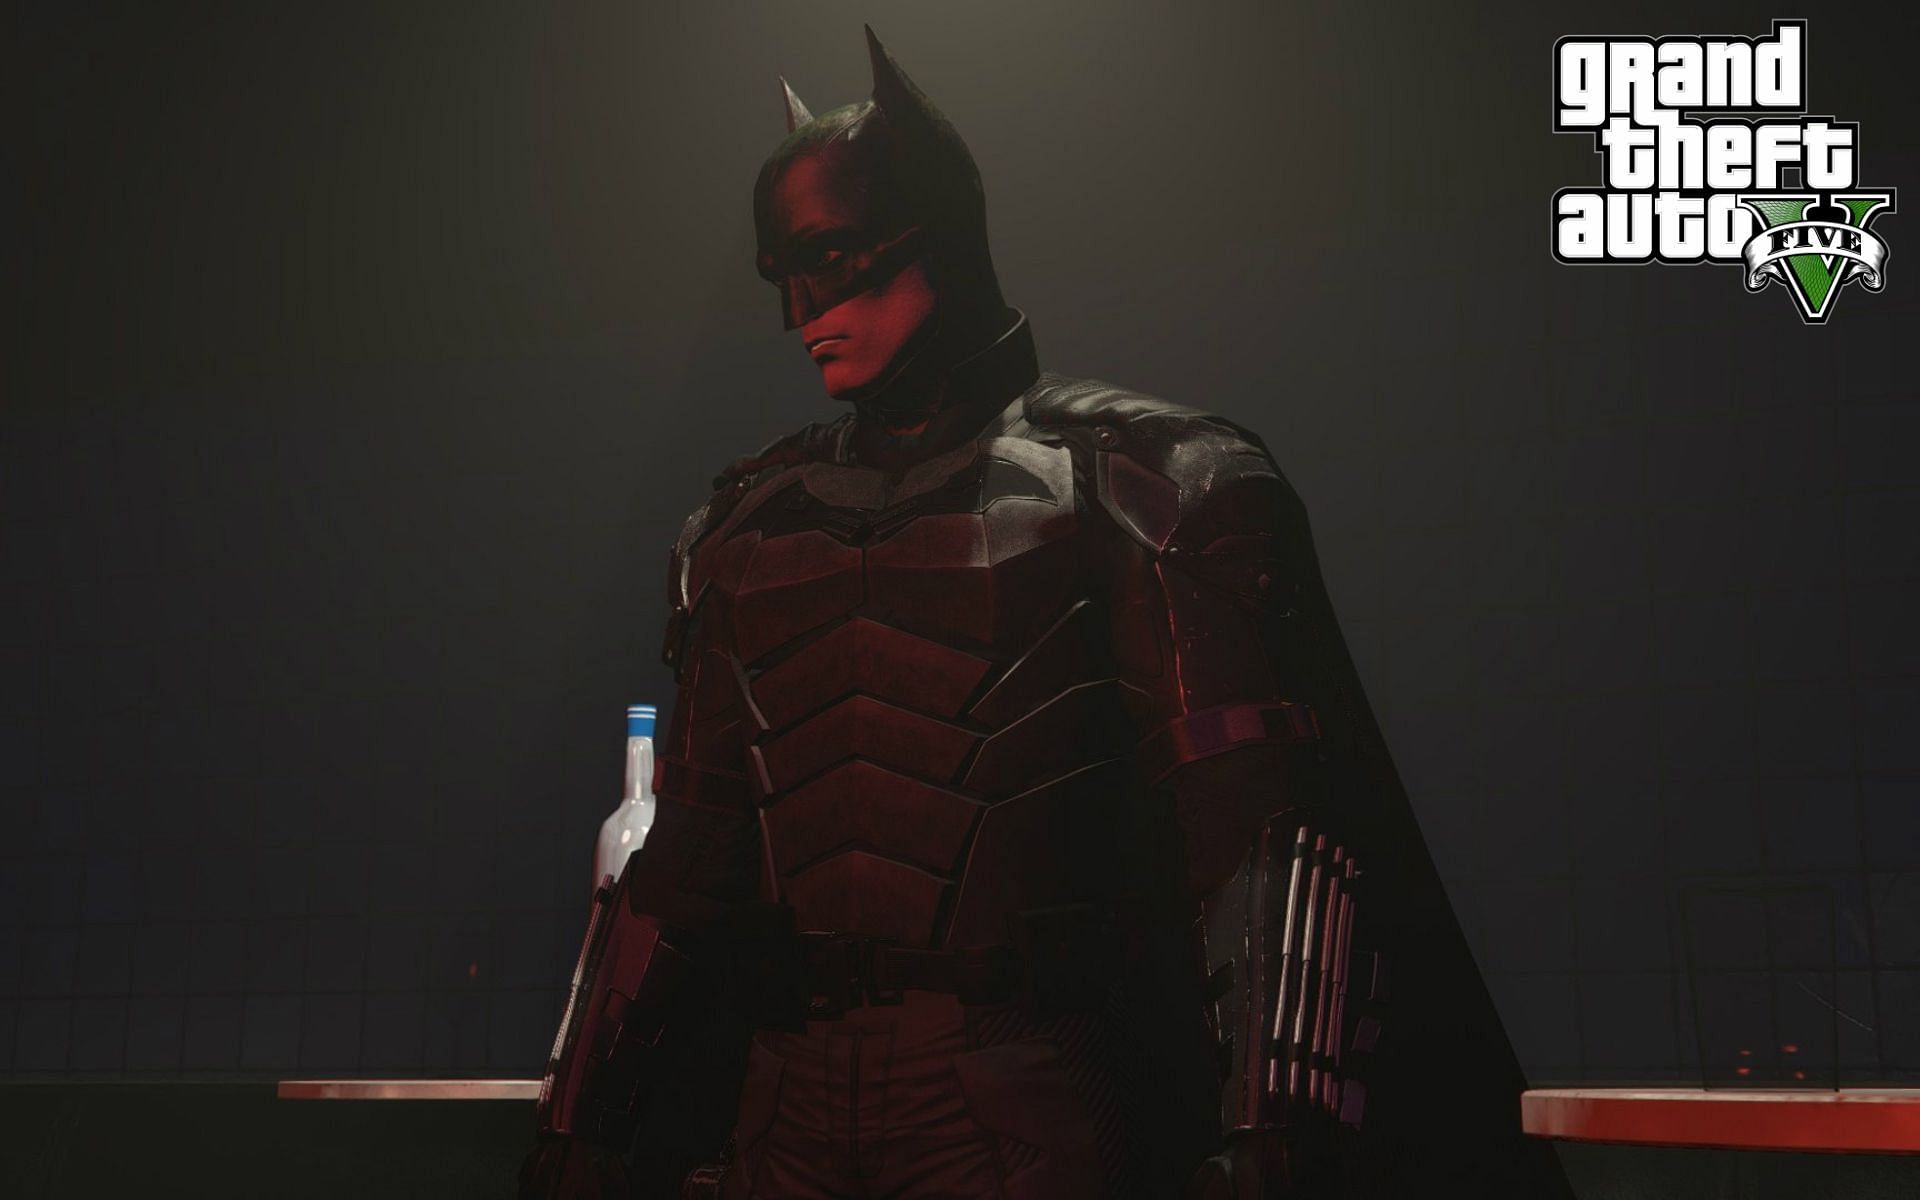 The Batman can now be recreated in GTA 5 with some exceptional mods (Image via GTA5-Mods)